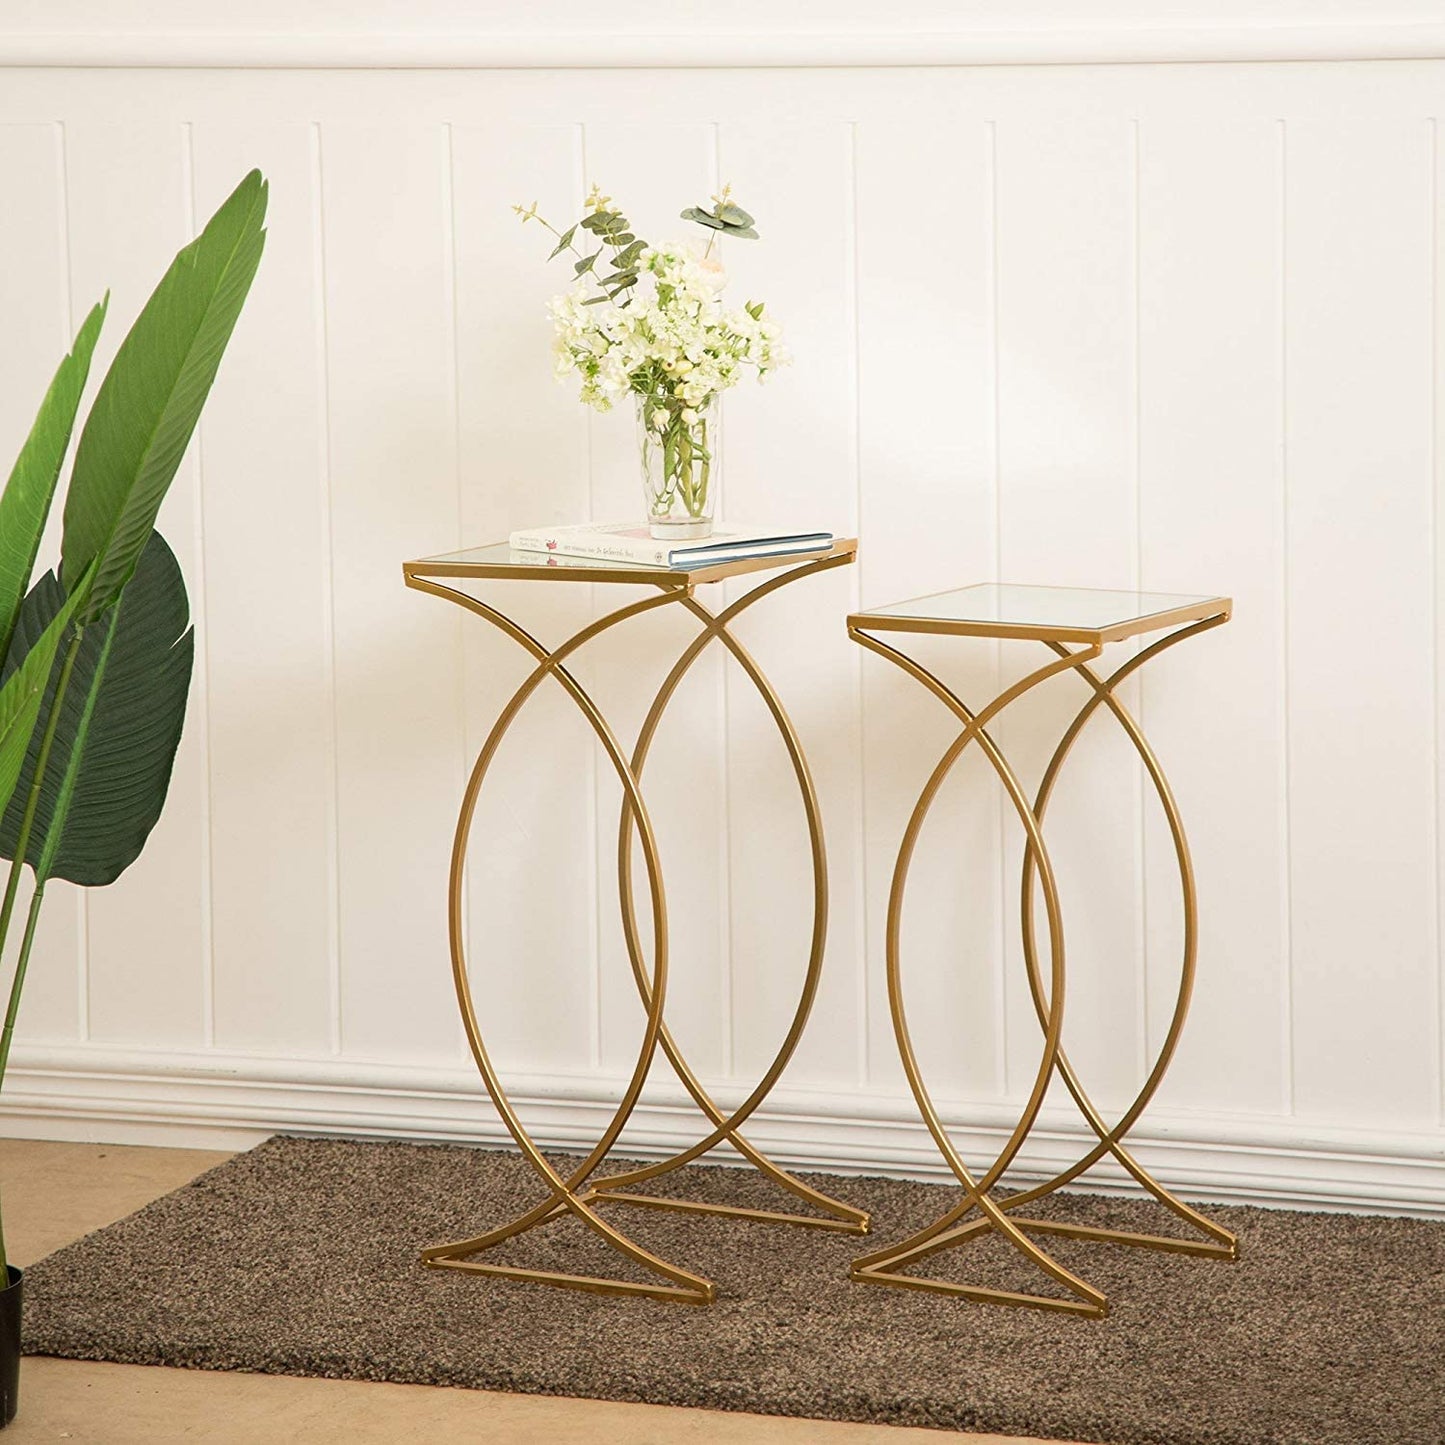 Nest Of Tables Set of 2 Nesting Coffee Tables Decorative Accent Side End Tables Plant Stand Chair for Bedroom, Living Room, Home Office and Patio 